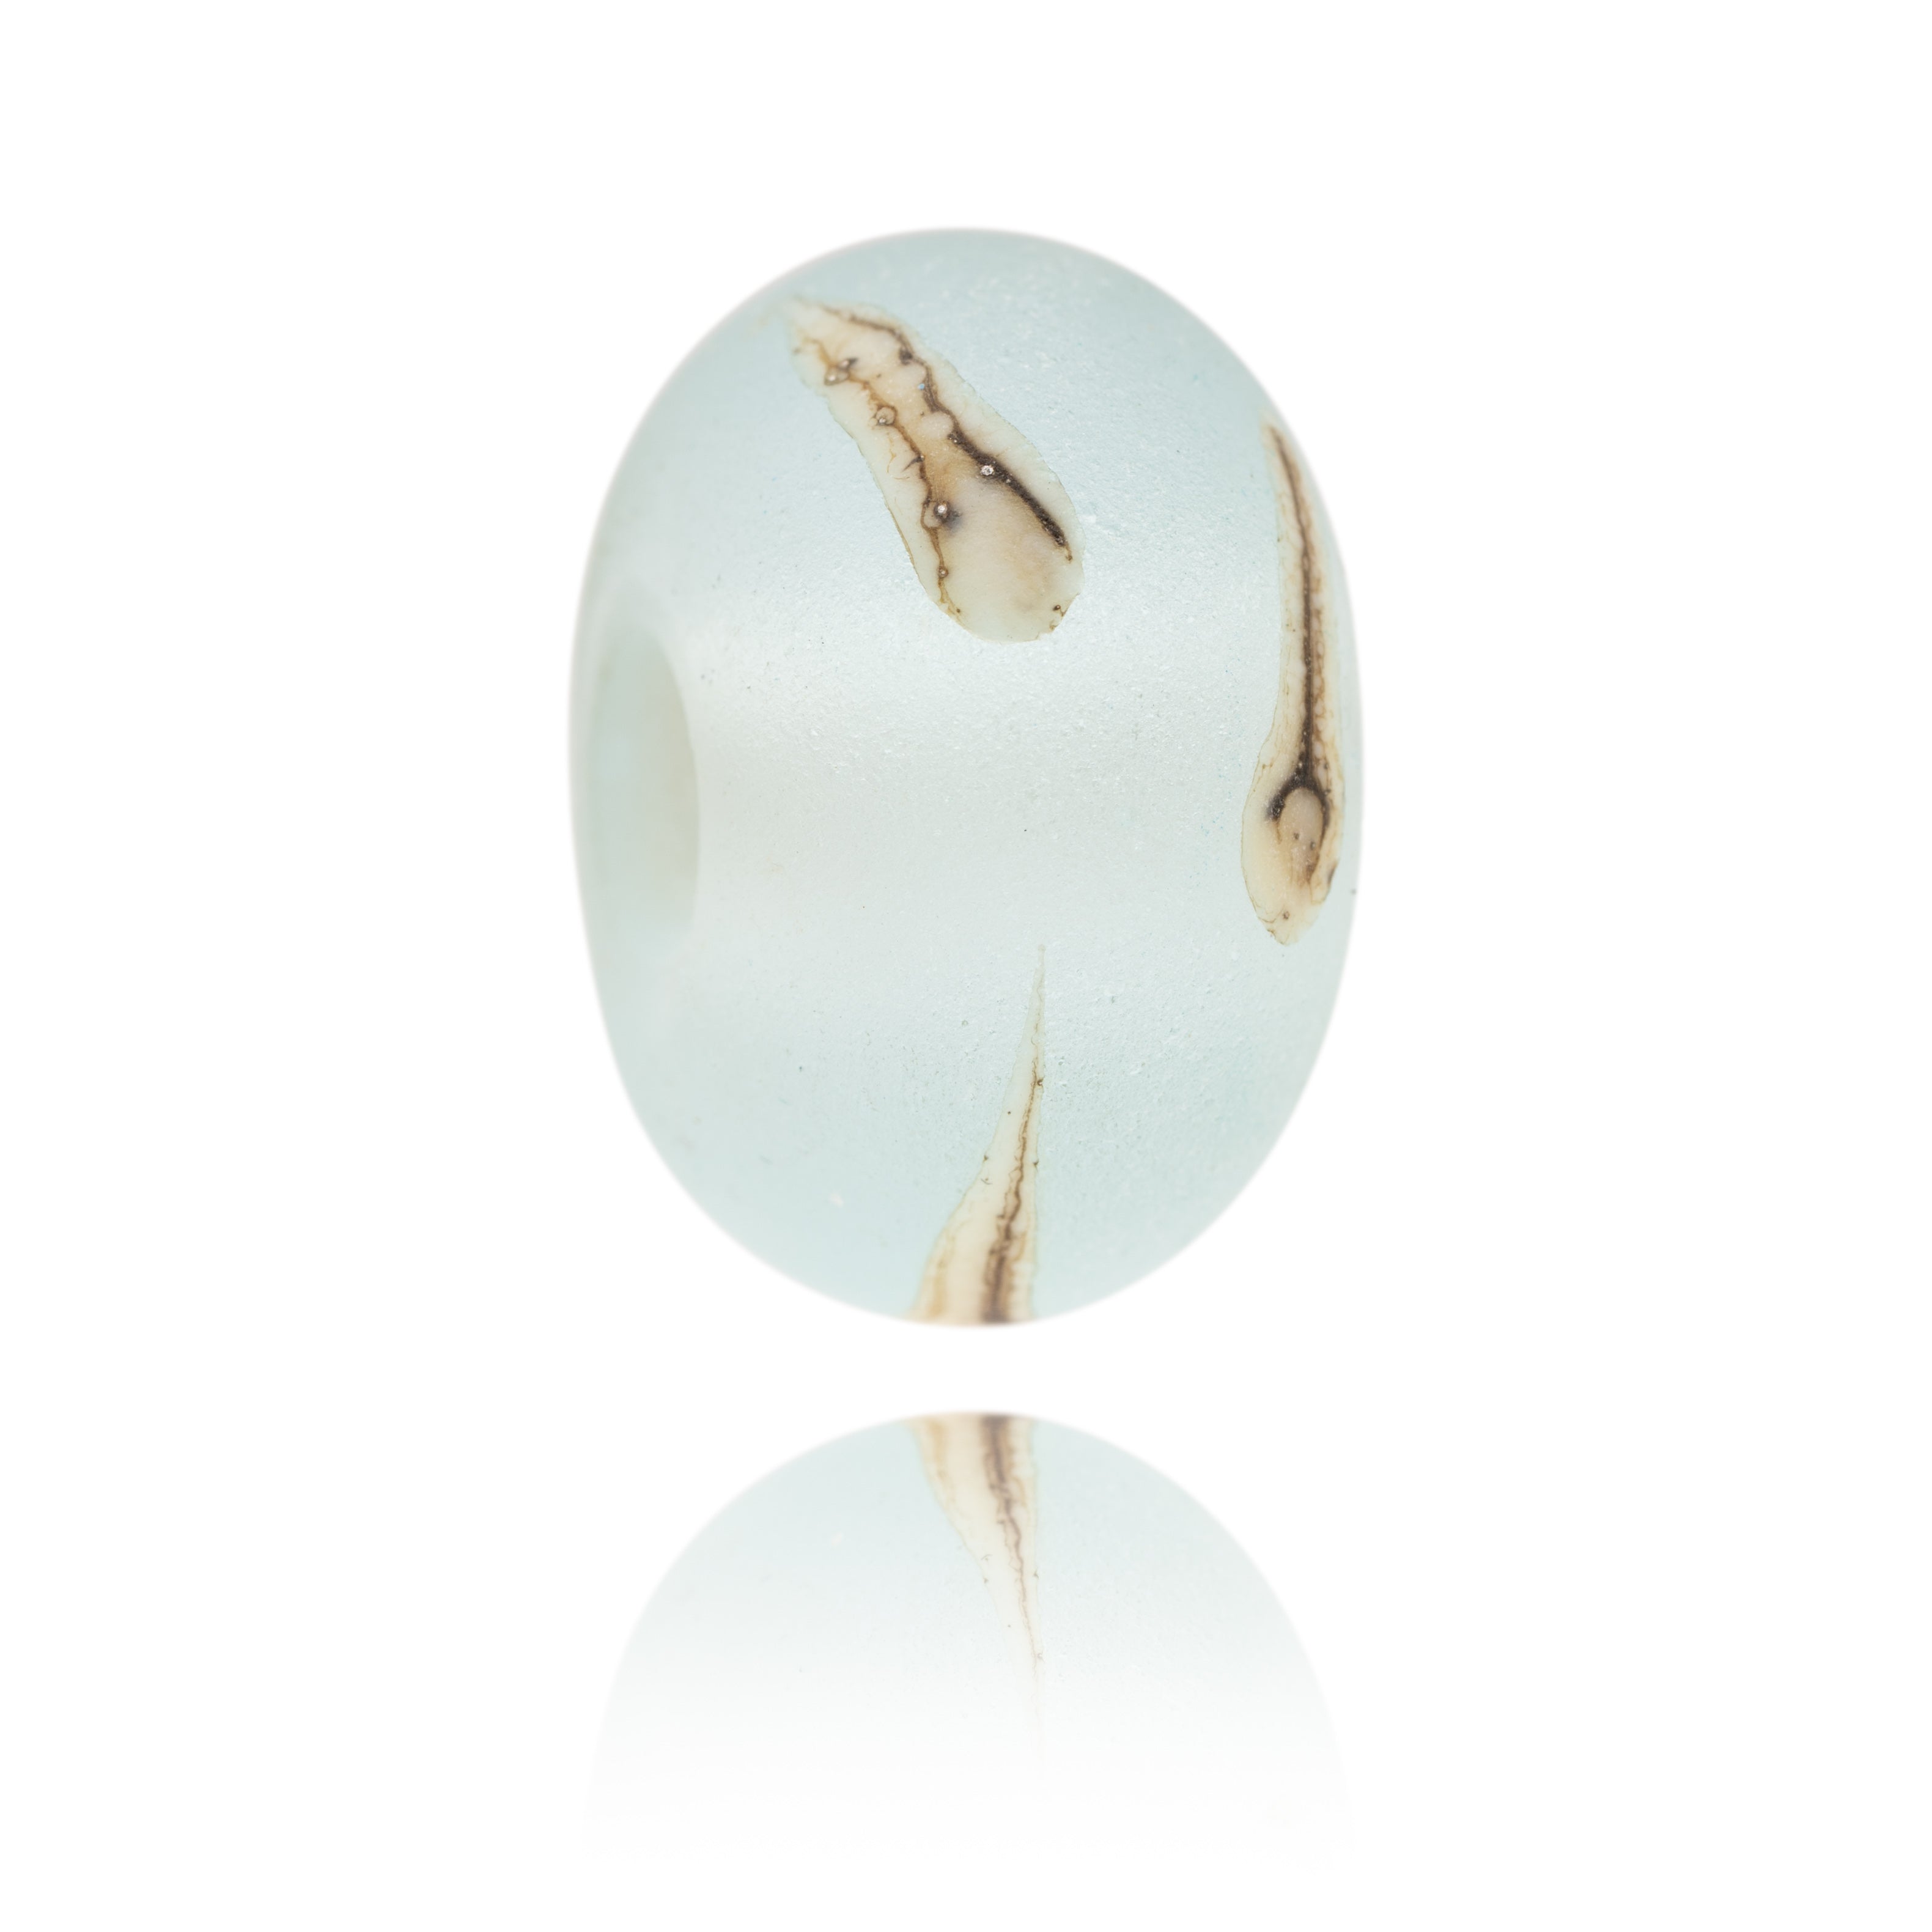 Pale blue Murano glass surf bead with ivory silver splashes, representing Hele Bay, North Devon.